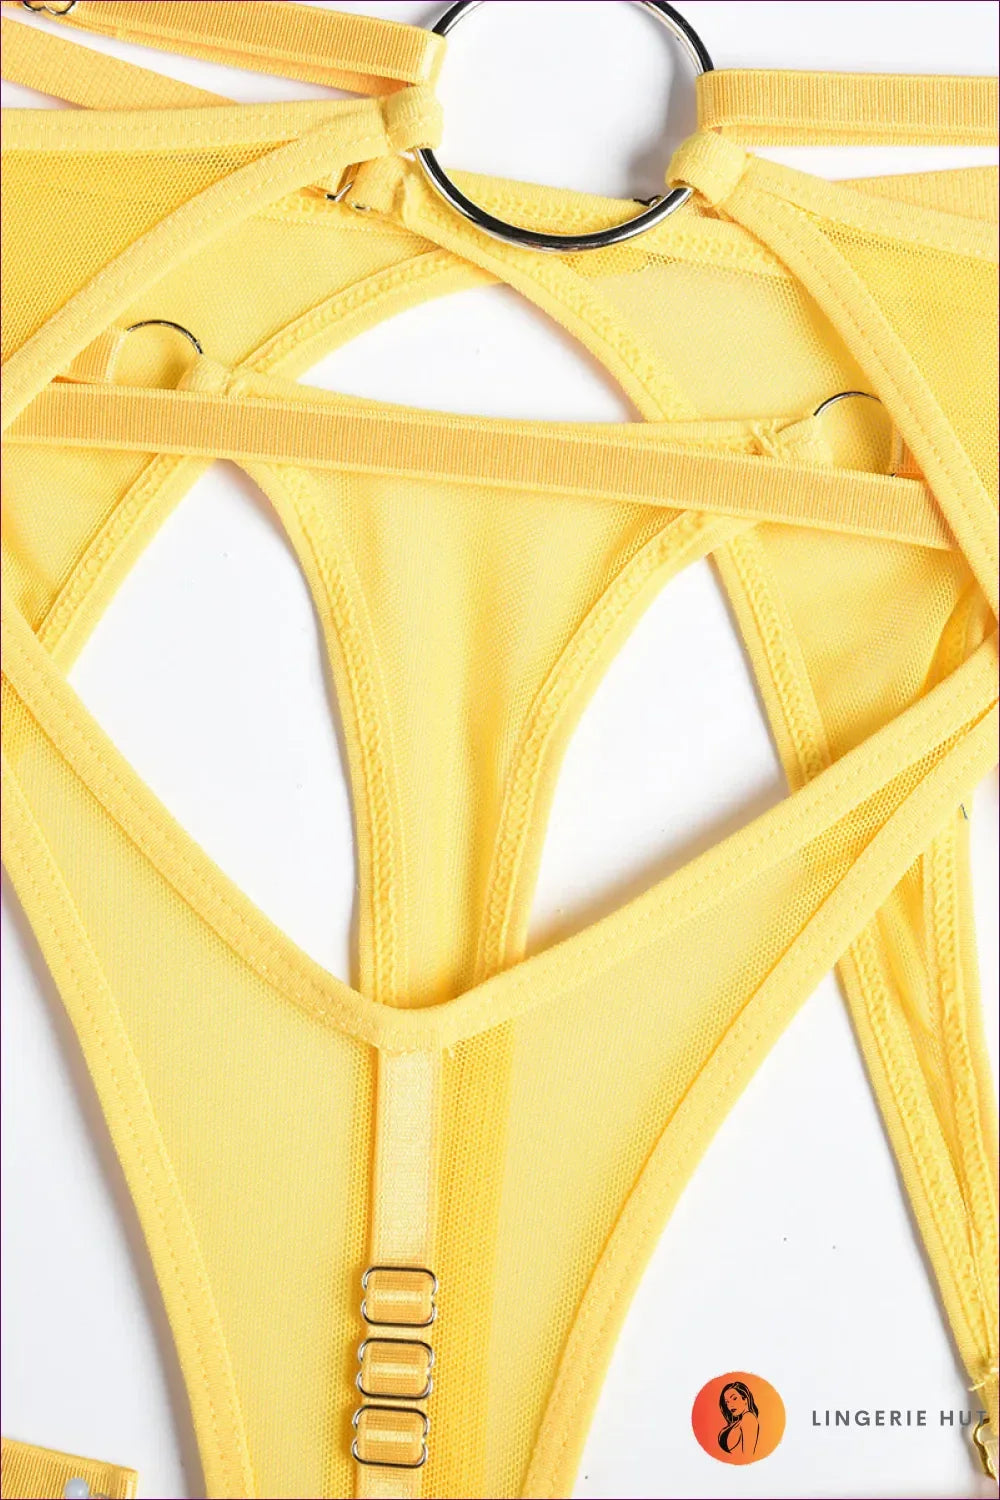 Unleash Your Sensuality With Our Ring Detail Mesh Harness Bra Set With Garter Belt. Delicate Mesh, Gold-tone